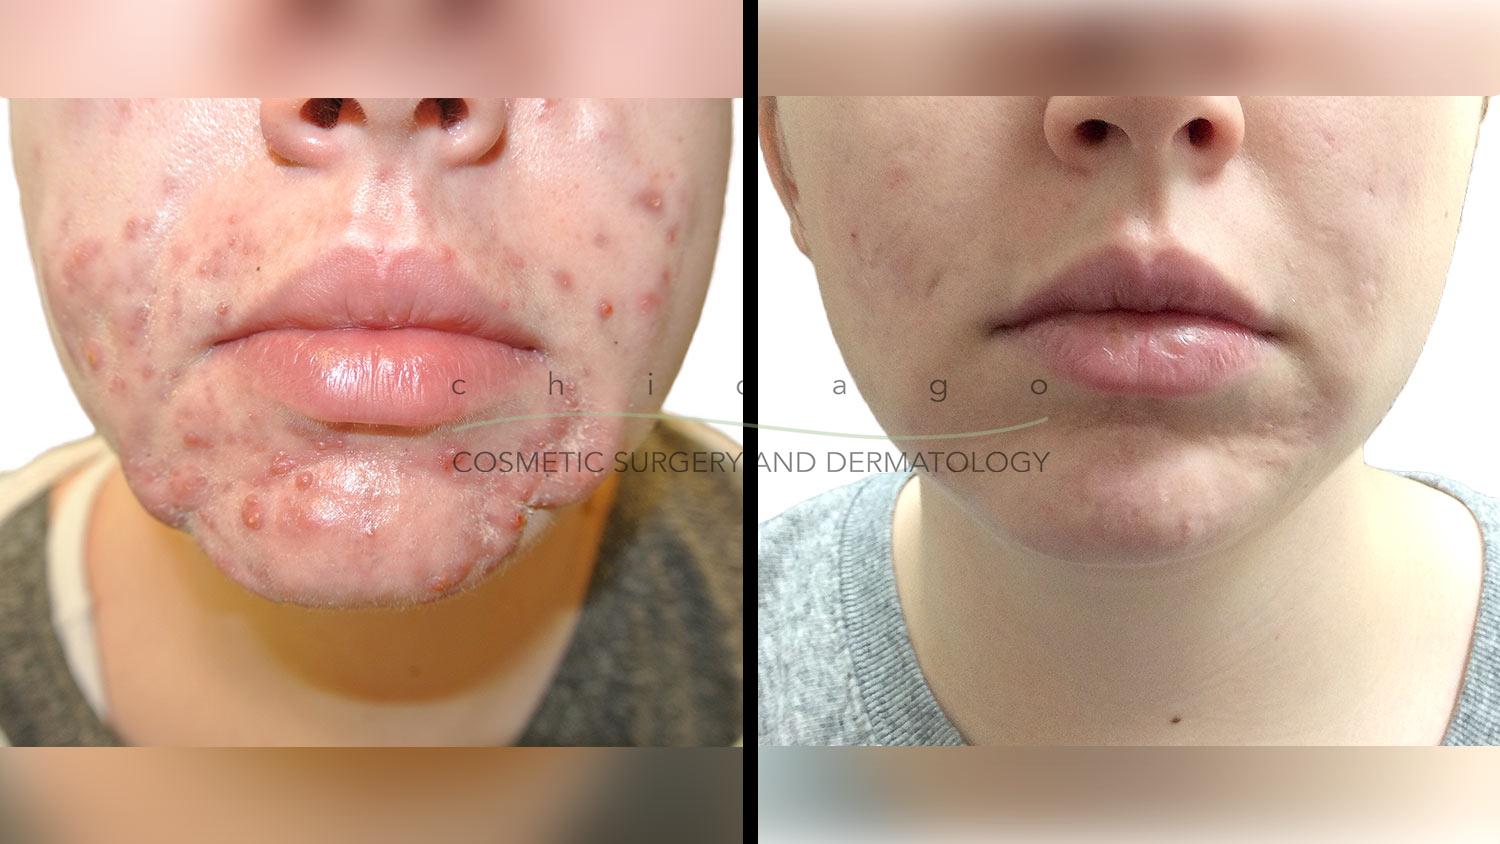 Acne before and after tretinoin